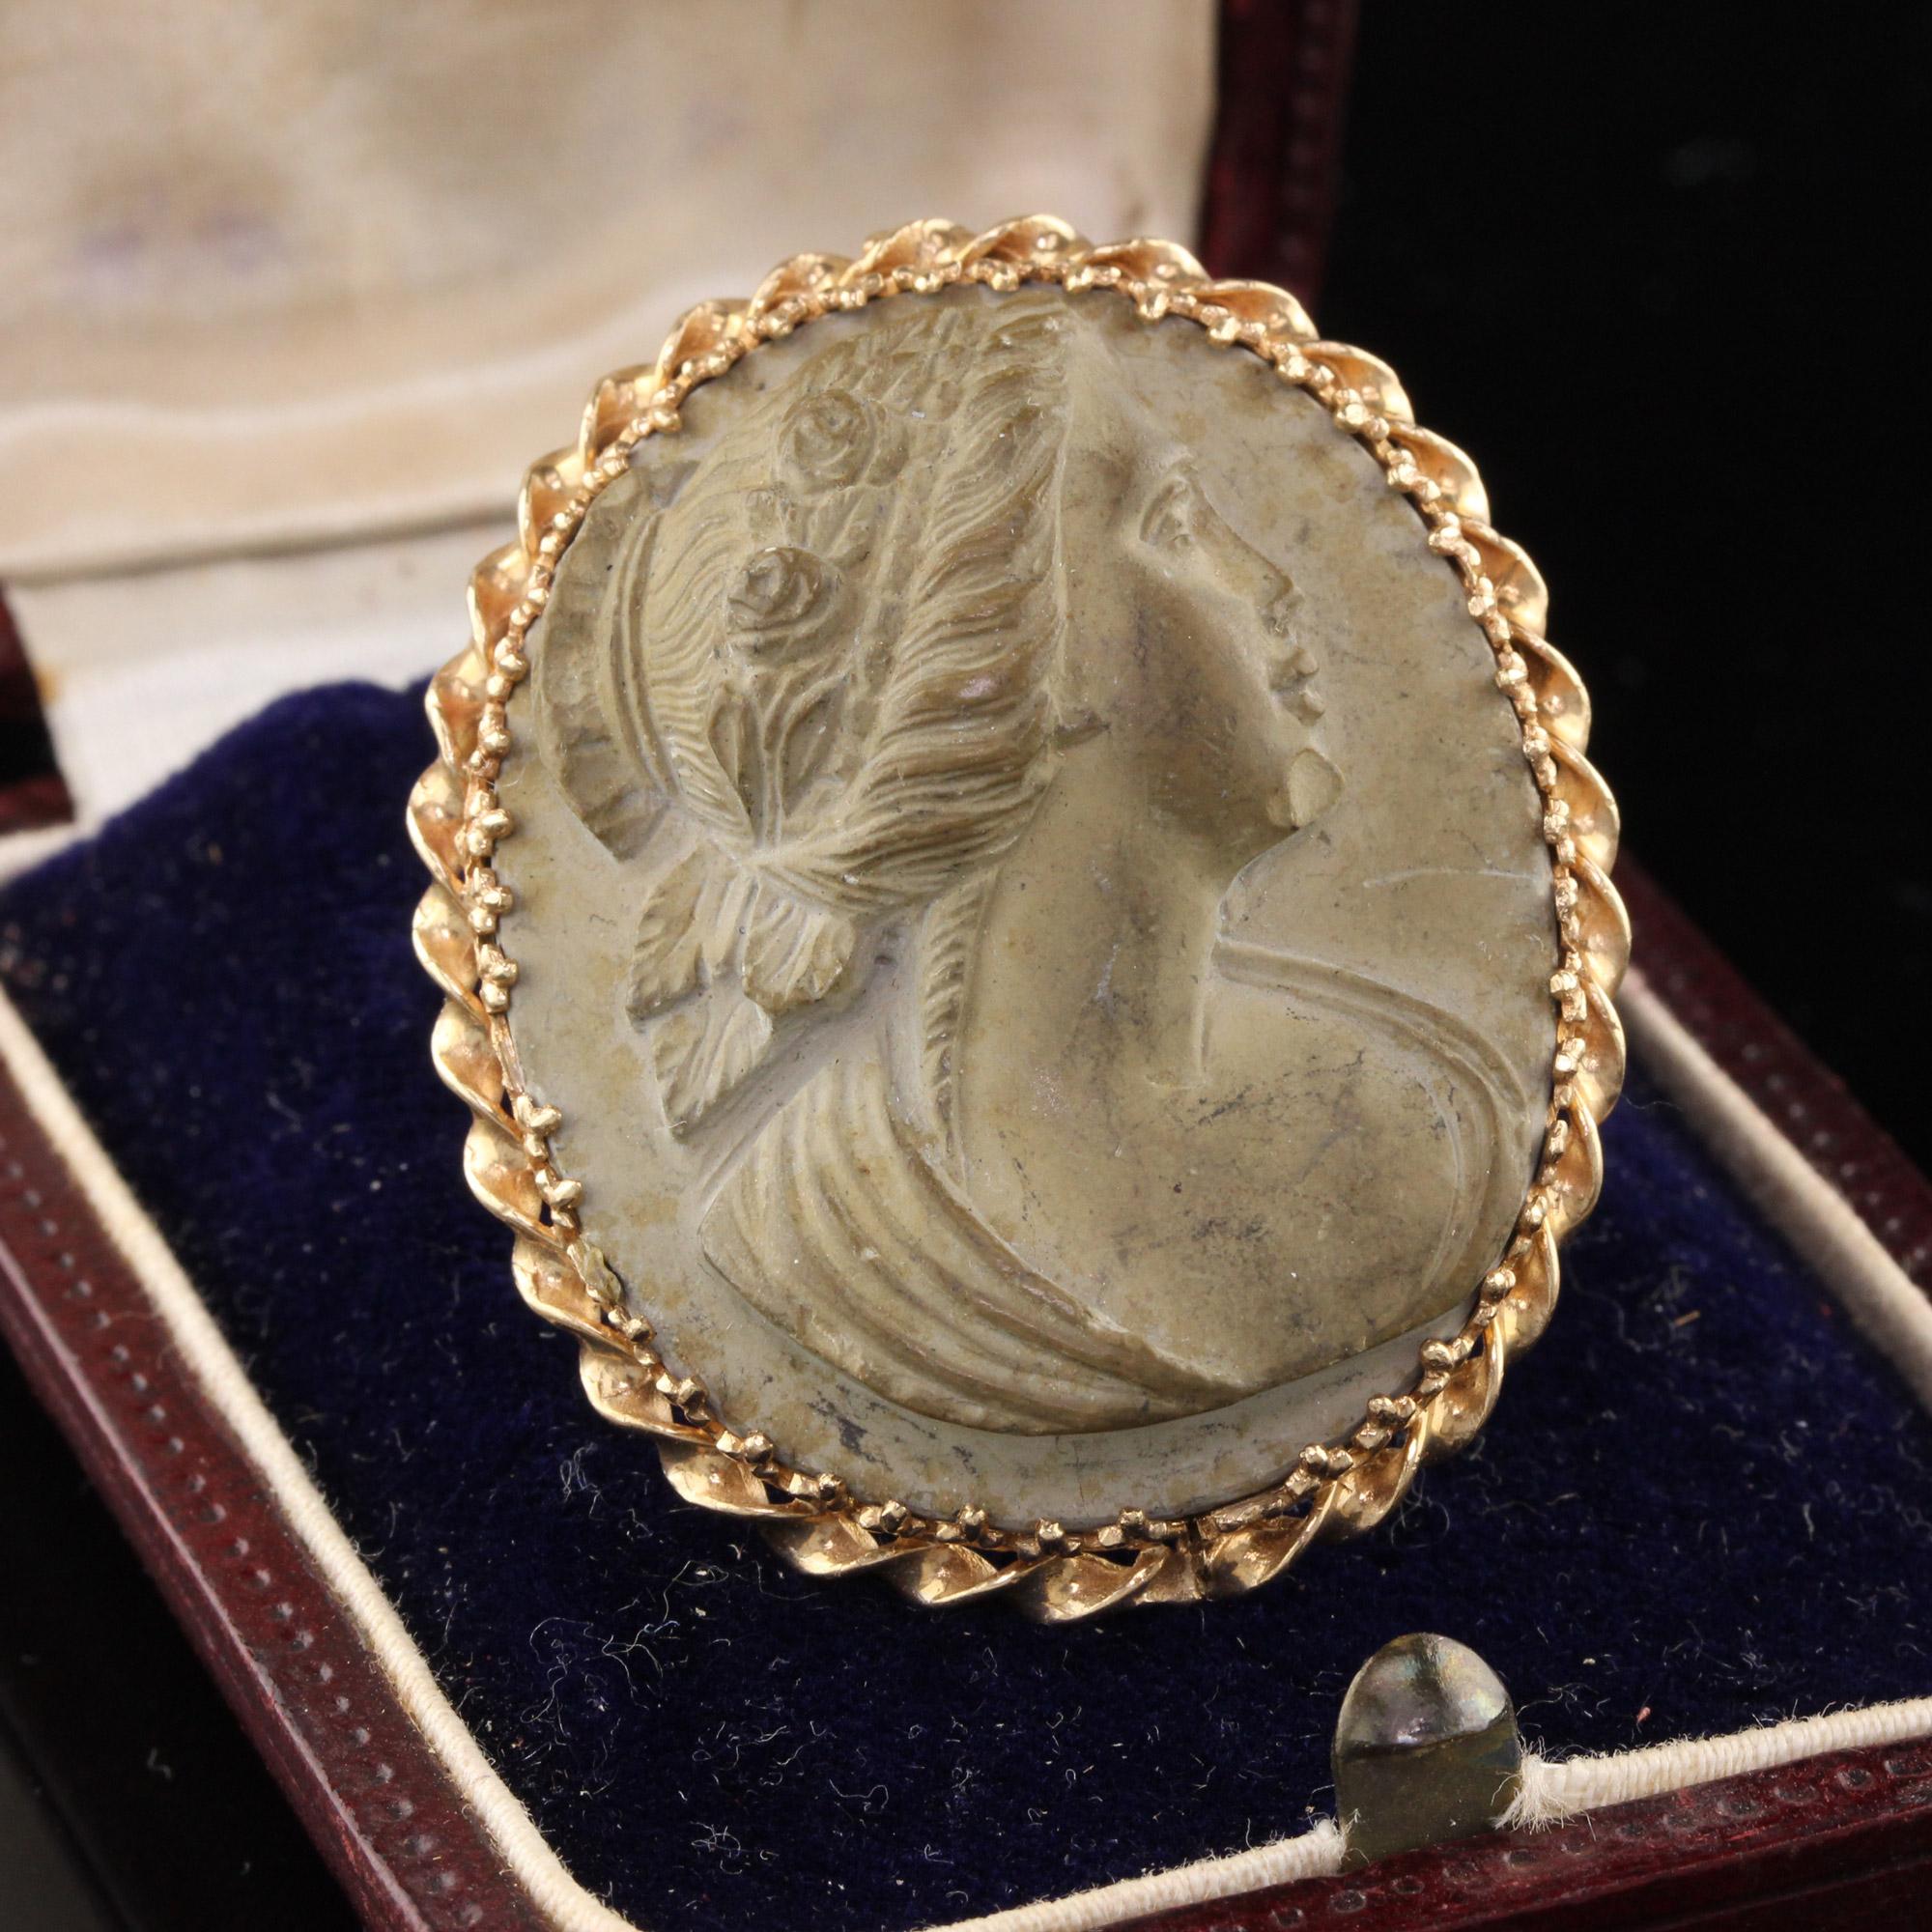 Antique Cameo Carved Stone Pin - Handmade - Amazing!

Metal: 14K Yellow Gold

Weight: 17.1 grams  

Measurement:   The Pin measures approximately 1 3/4 inches long and 1 3/8 inches wide.  

There are some markings on the back of the pin but I can